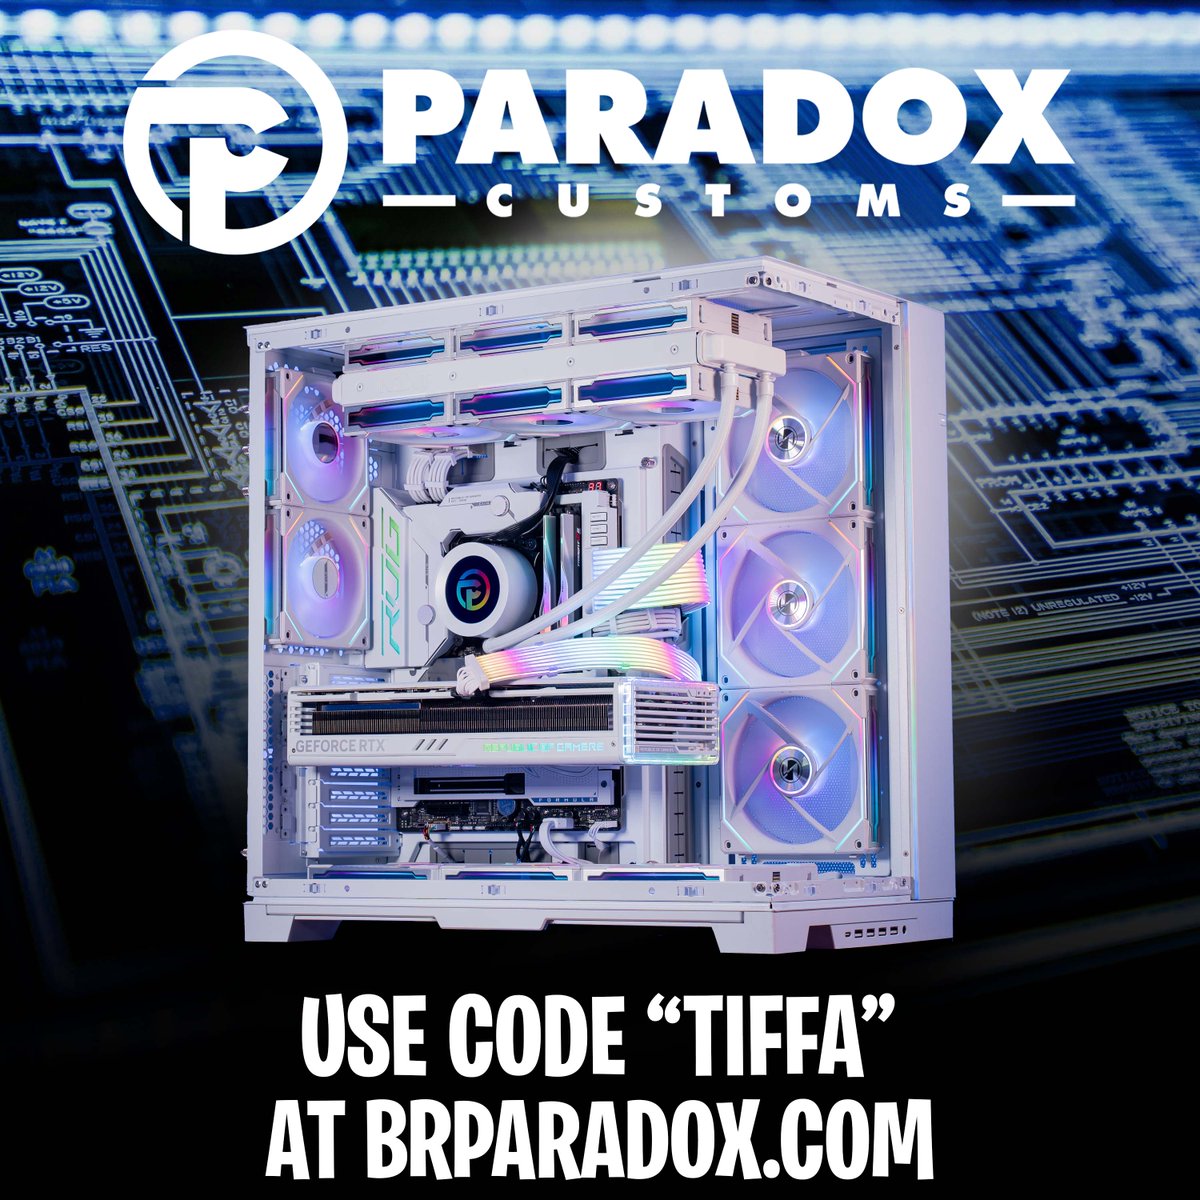 I am happy to announce I am now sponsored by @Brparadox 💙 Use code “TIFFA” for $$ off your purchase 🥹❣️brparadox.com/?ref=tiffajessi